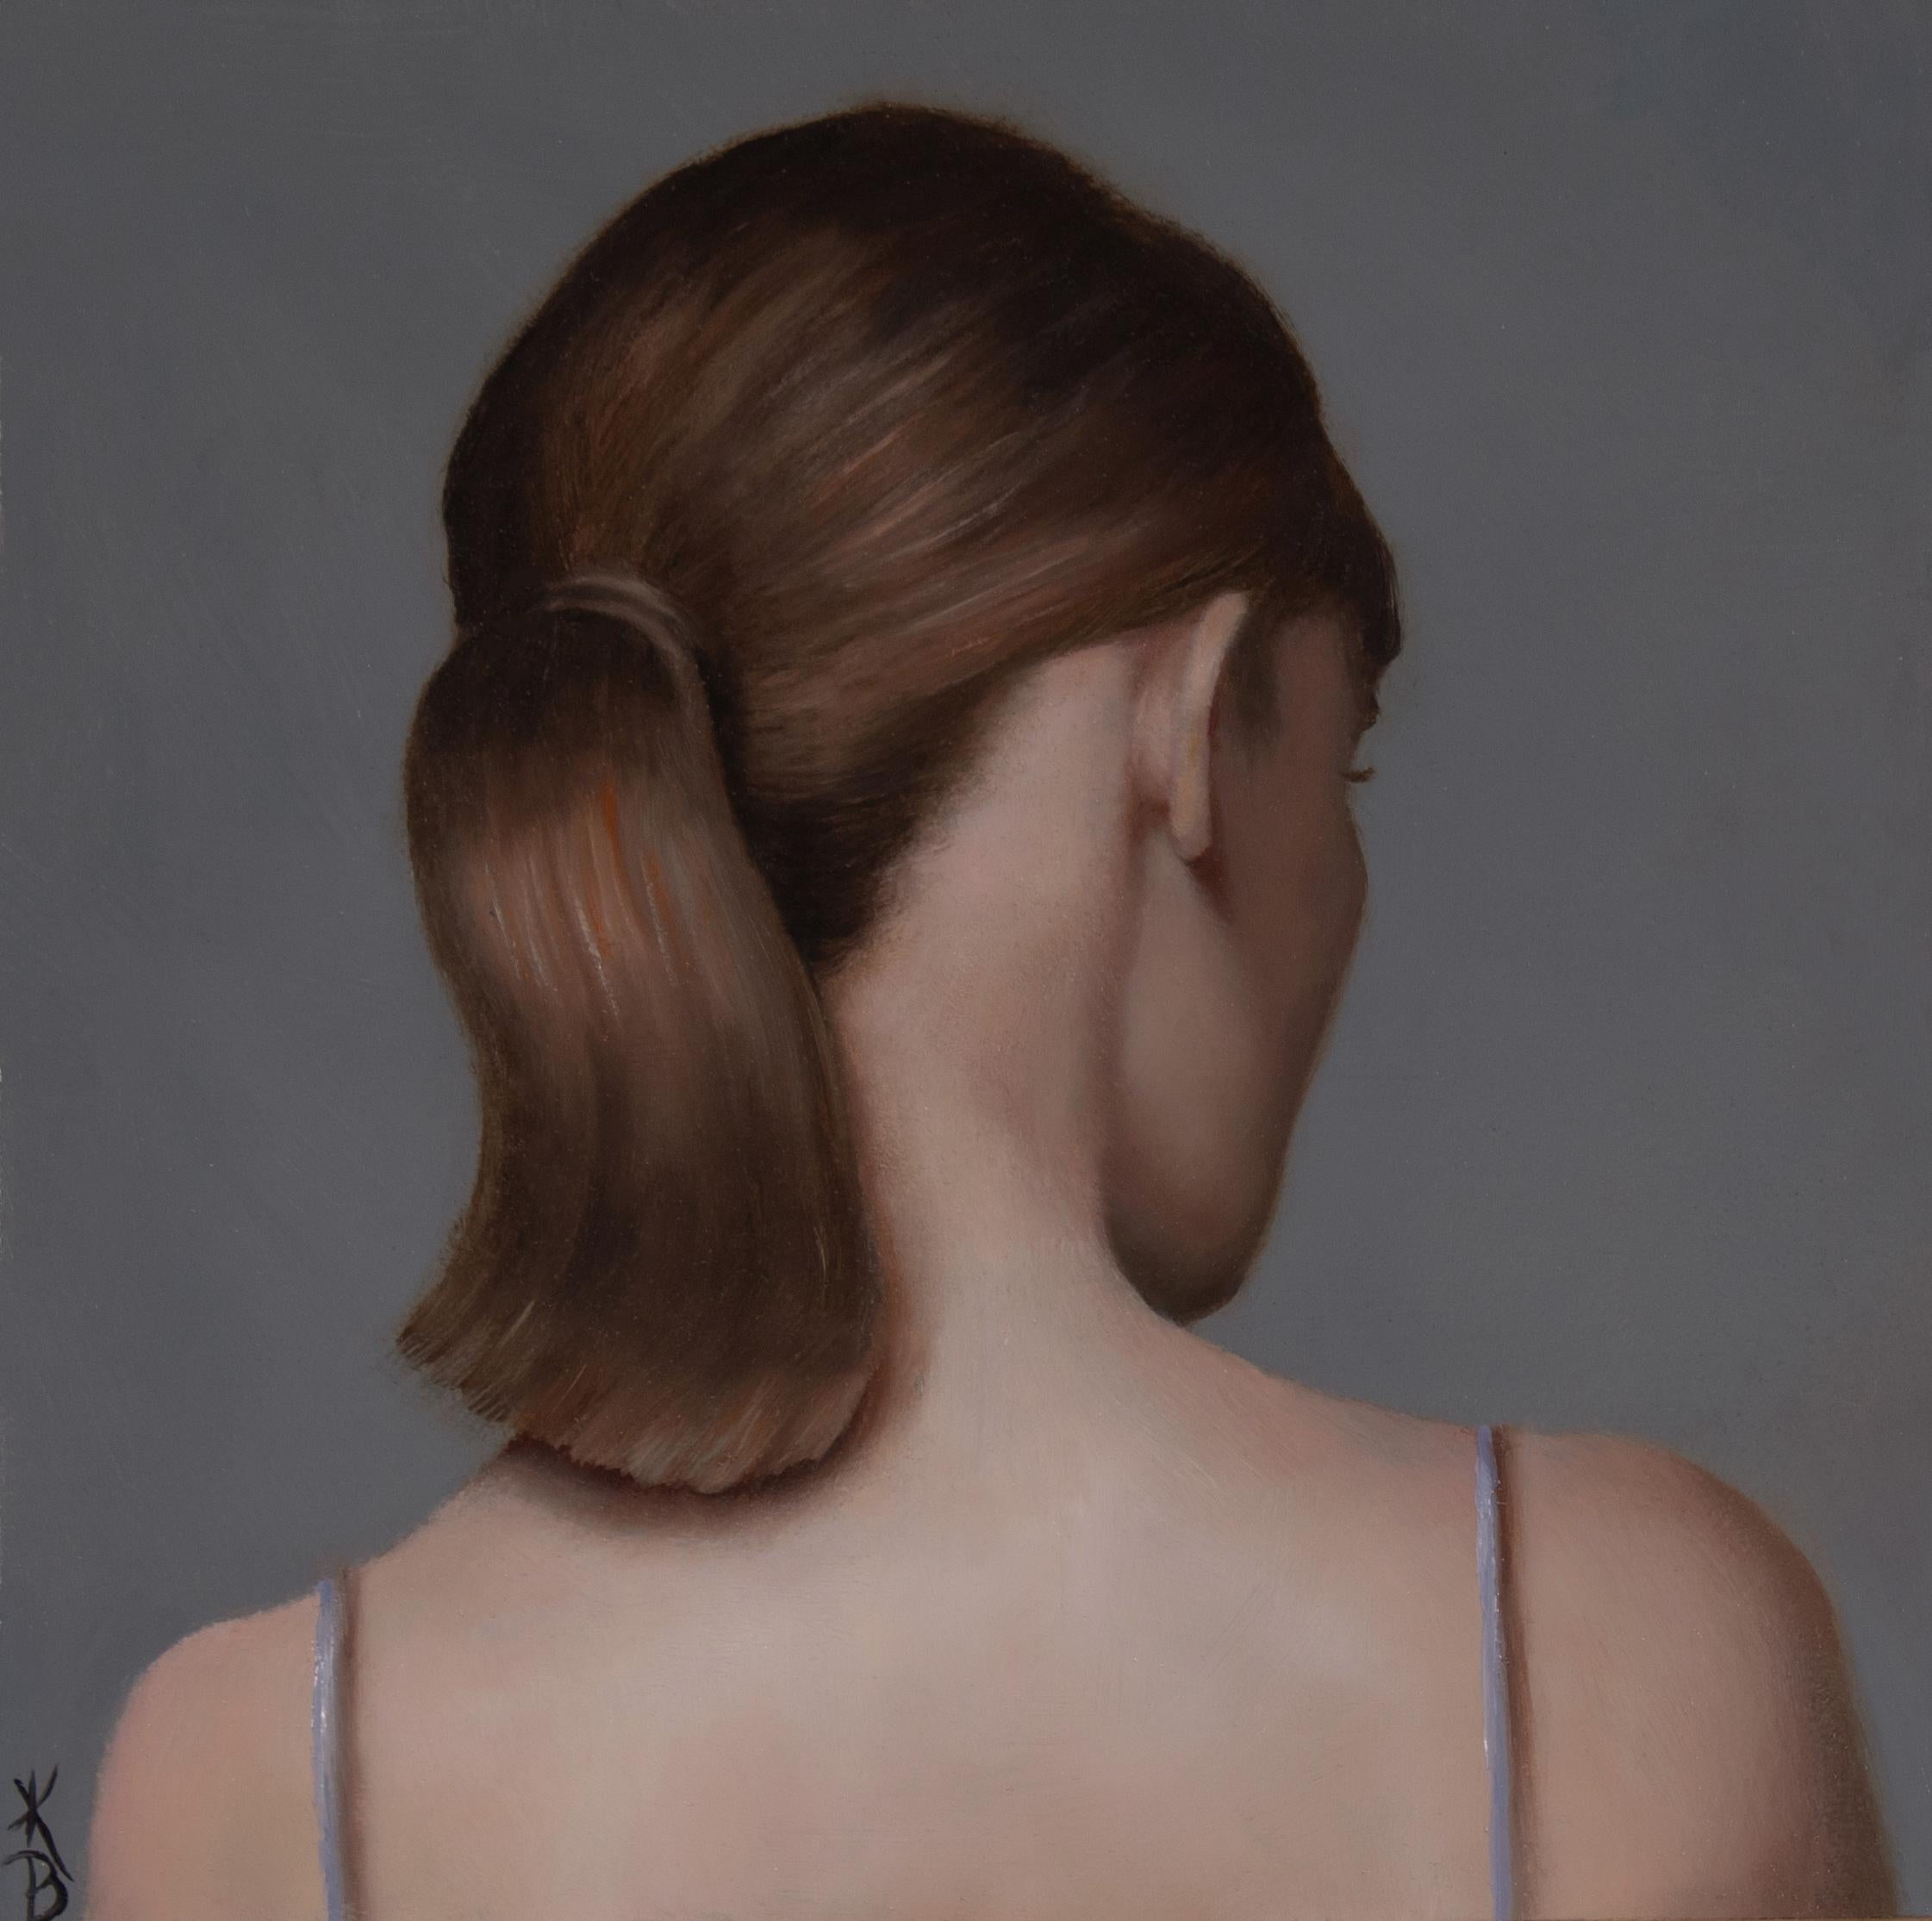 Kelly Birkenruth's "Sleek Ponytail" (2023) is an original oil painting on panel, measuring 6 x 6 x 2 inches. This elegant artwork features the back profile of a young woman with her hair styled in a sleek ponytail. The soft, muted background